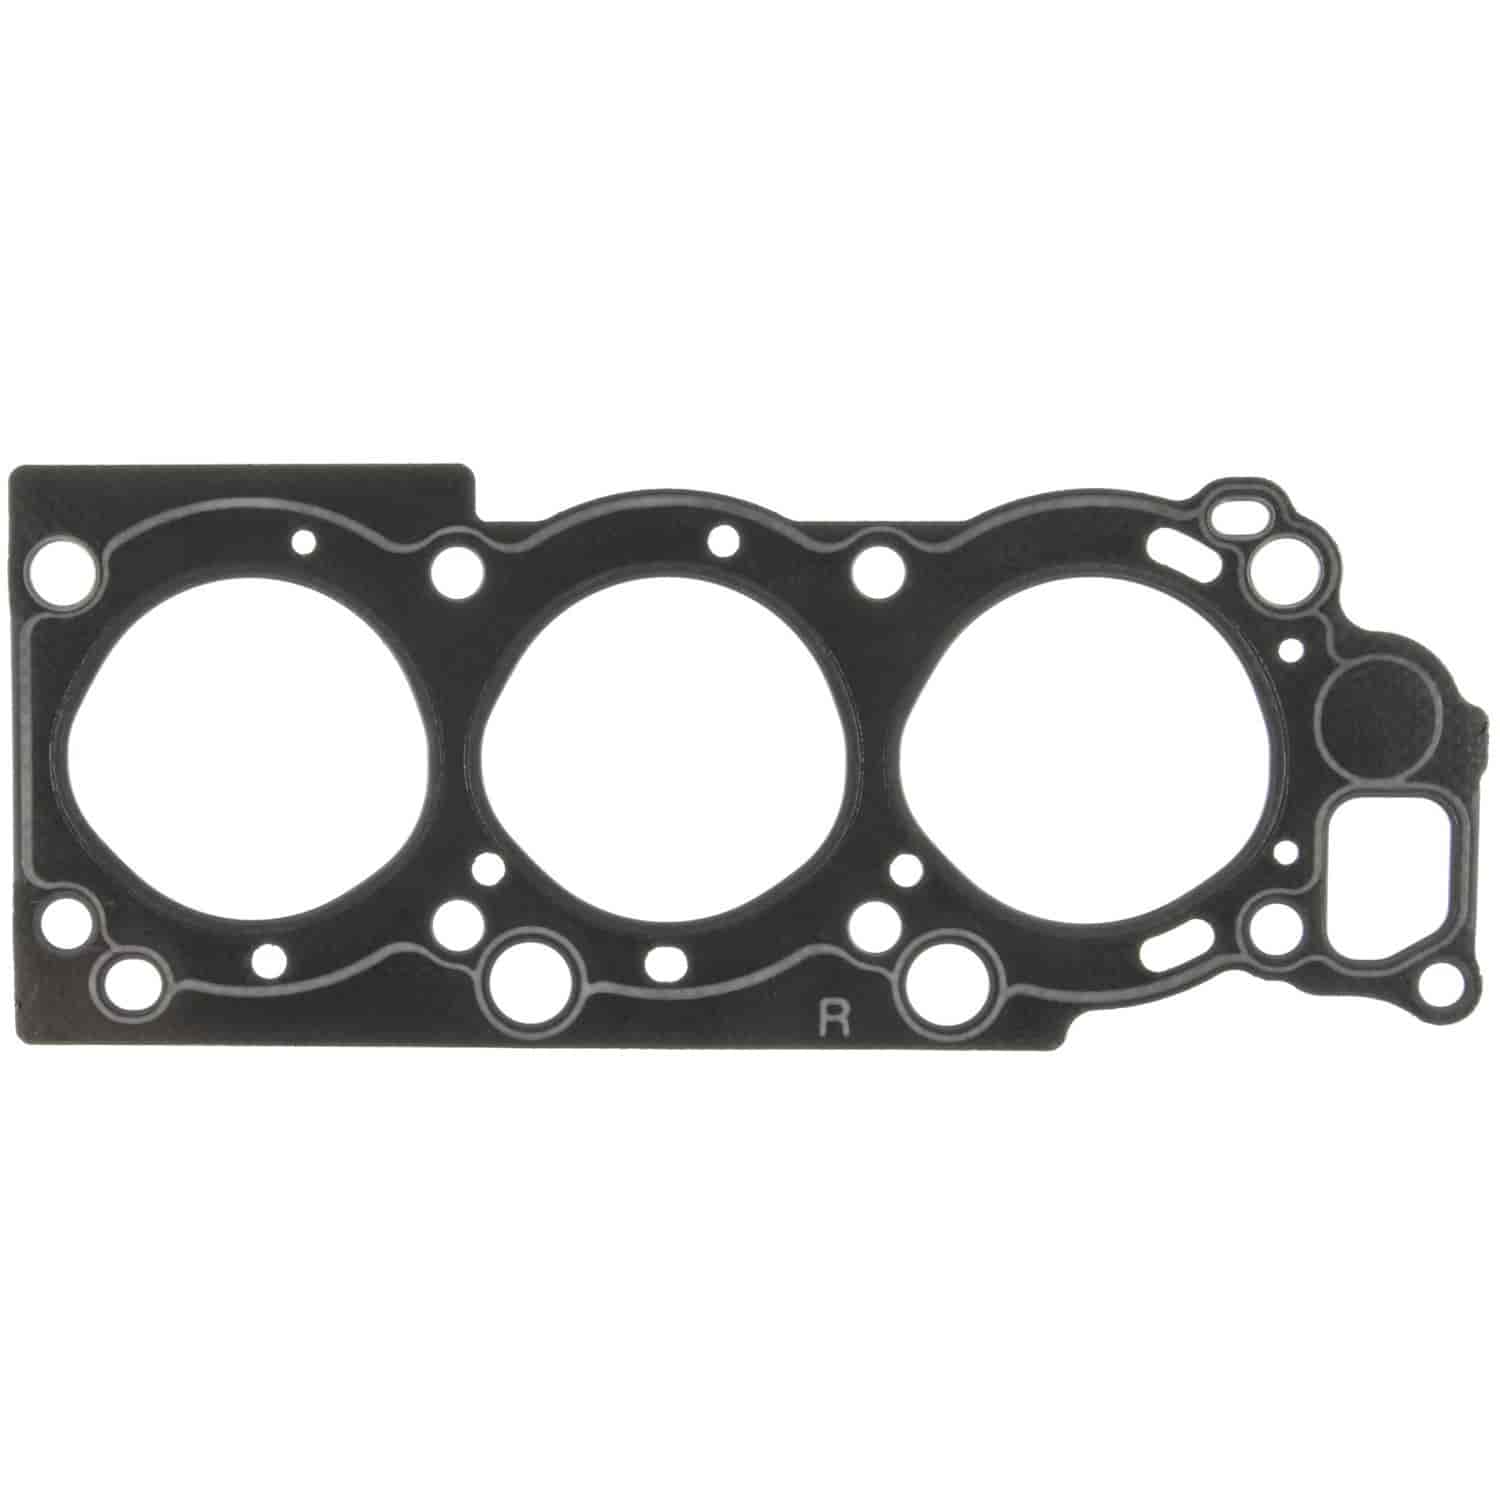 Cylinder Head Gasket Right Toyota Pickup 4 Runner w/2954cc 3VZE Eng. 88-95 Right Side